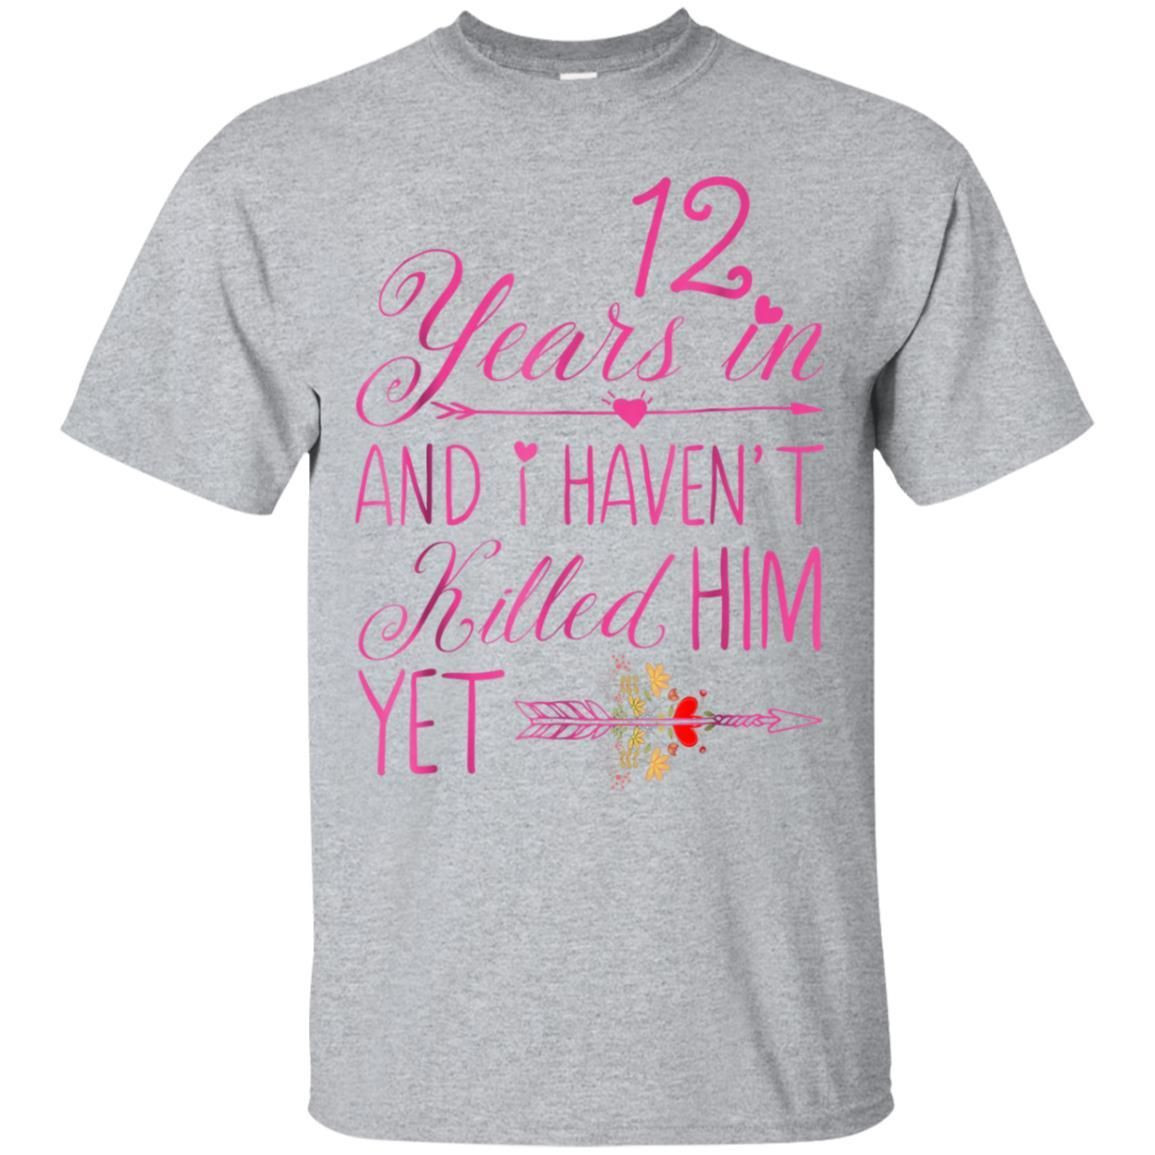 12 Year Anniversary Gift Ideas For Her
 Awesome 12th wedding anniversary ts for her married 12